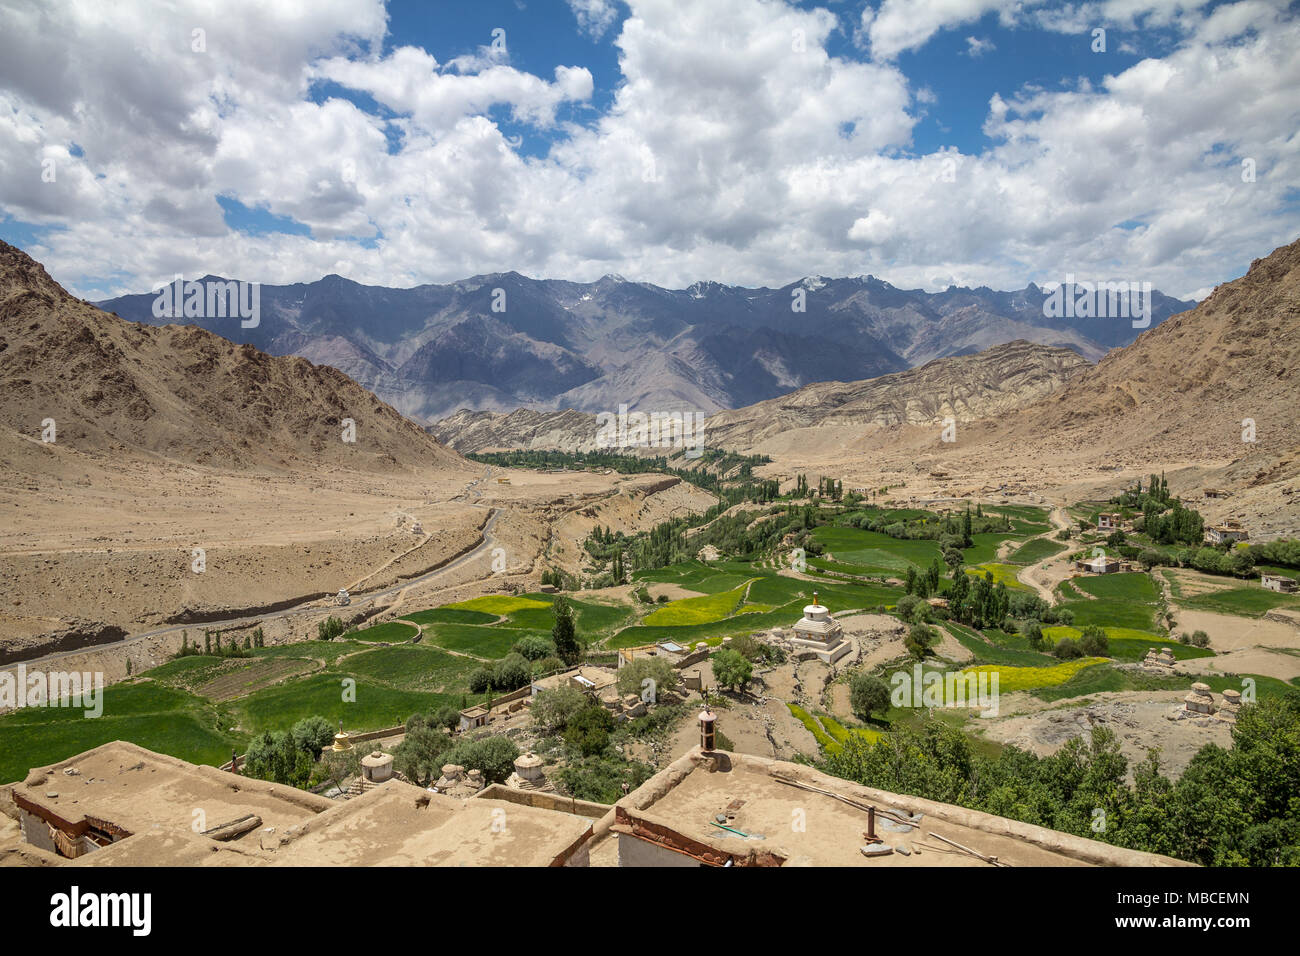 View from Likir Monastery is typical for Ladakh... bone dry land except  where trees and crops can grow due to moisture from nearby water course Stock Photo